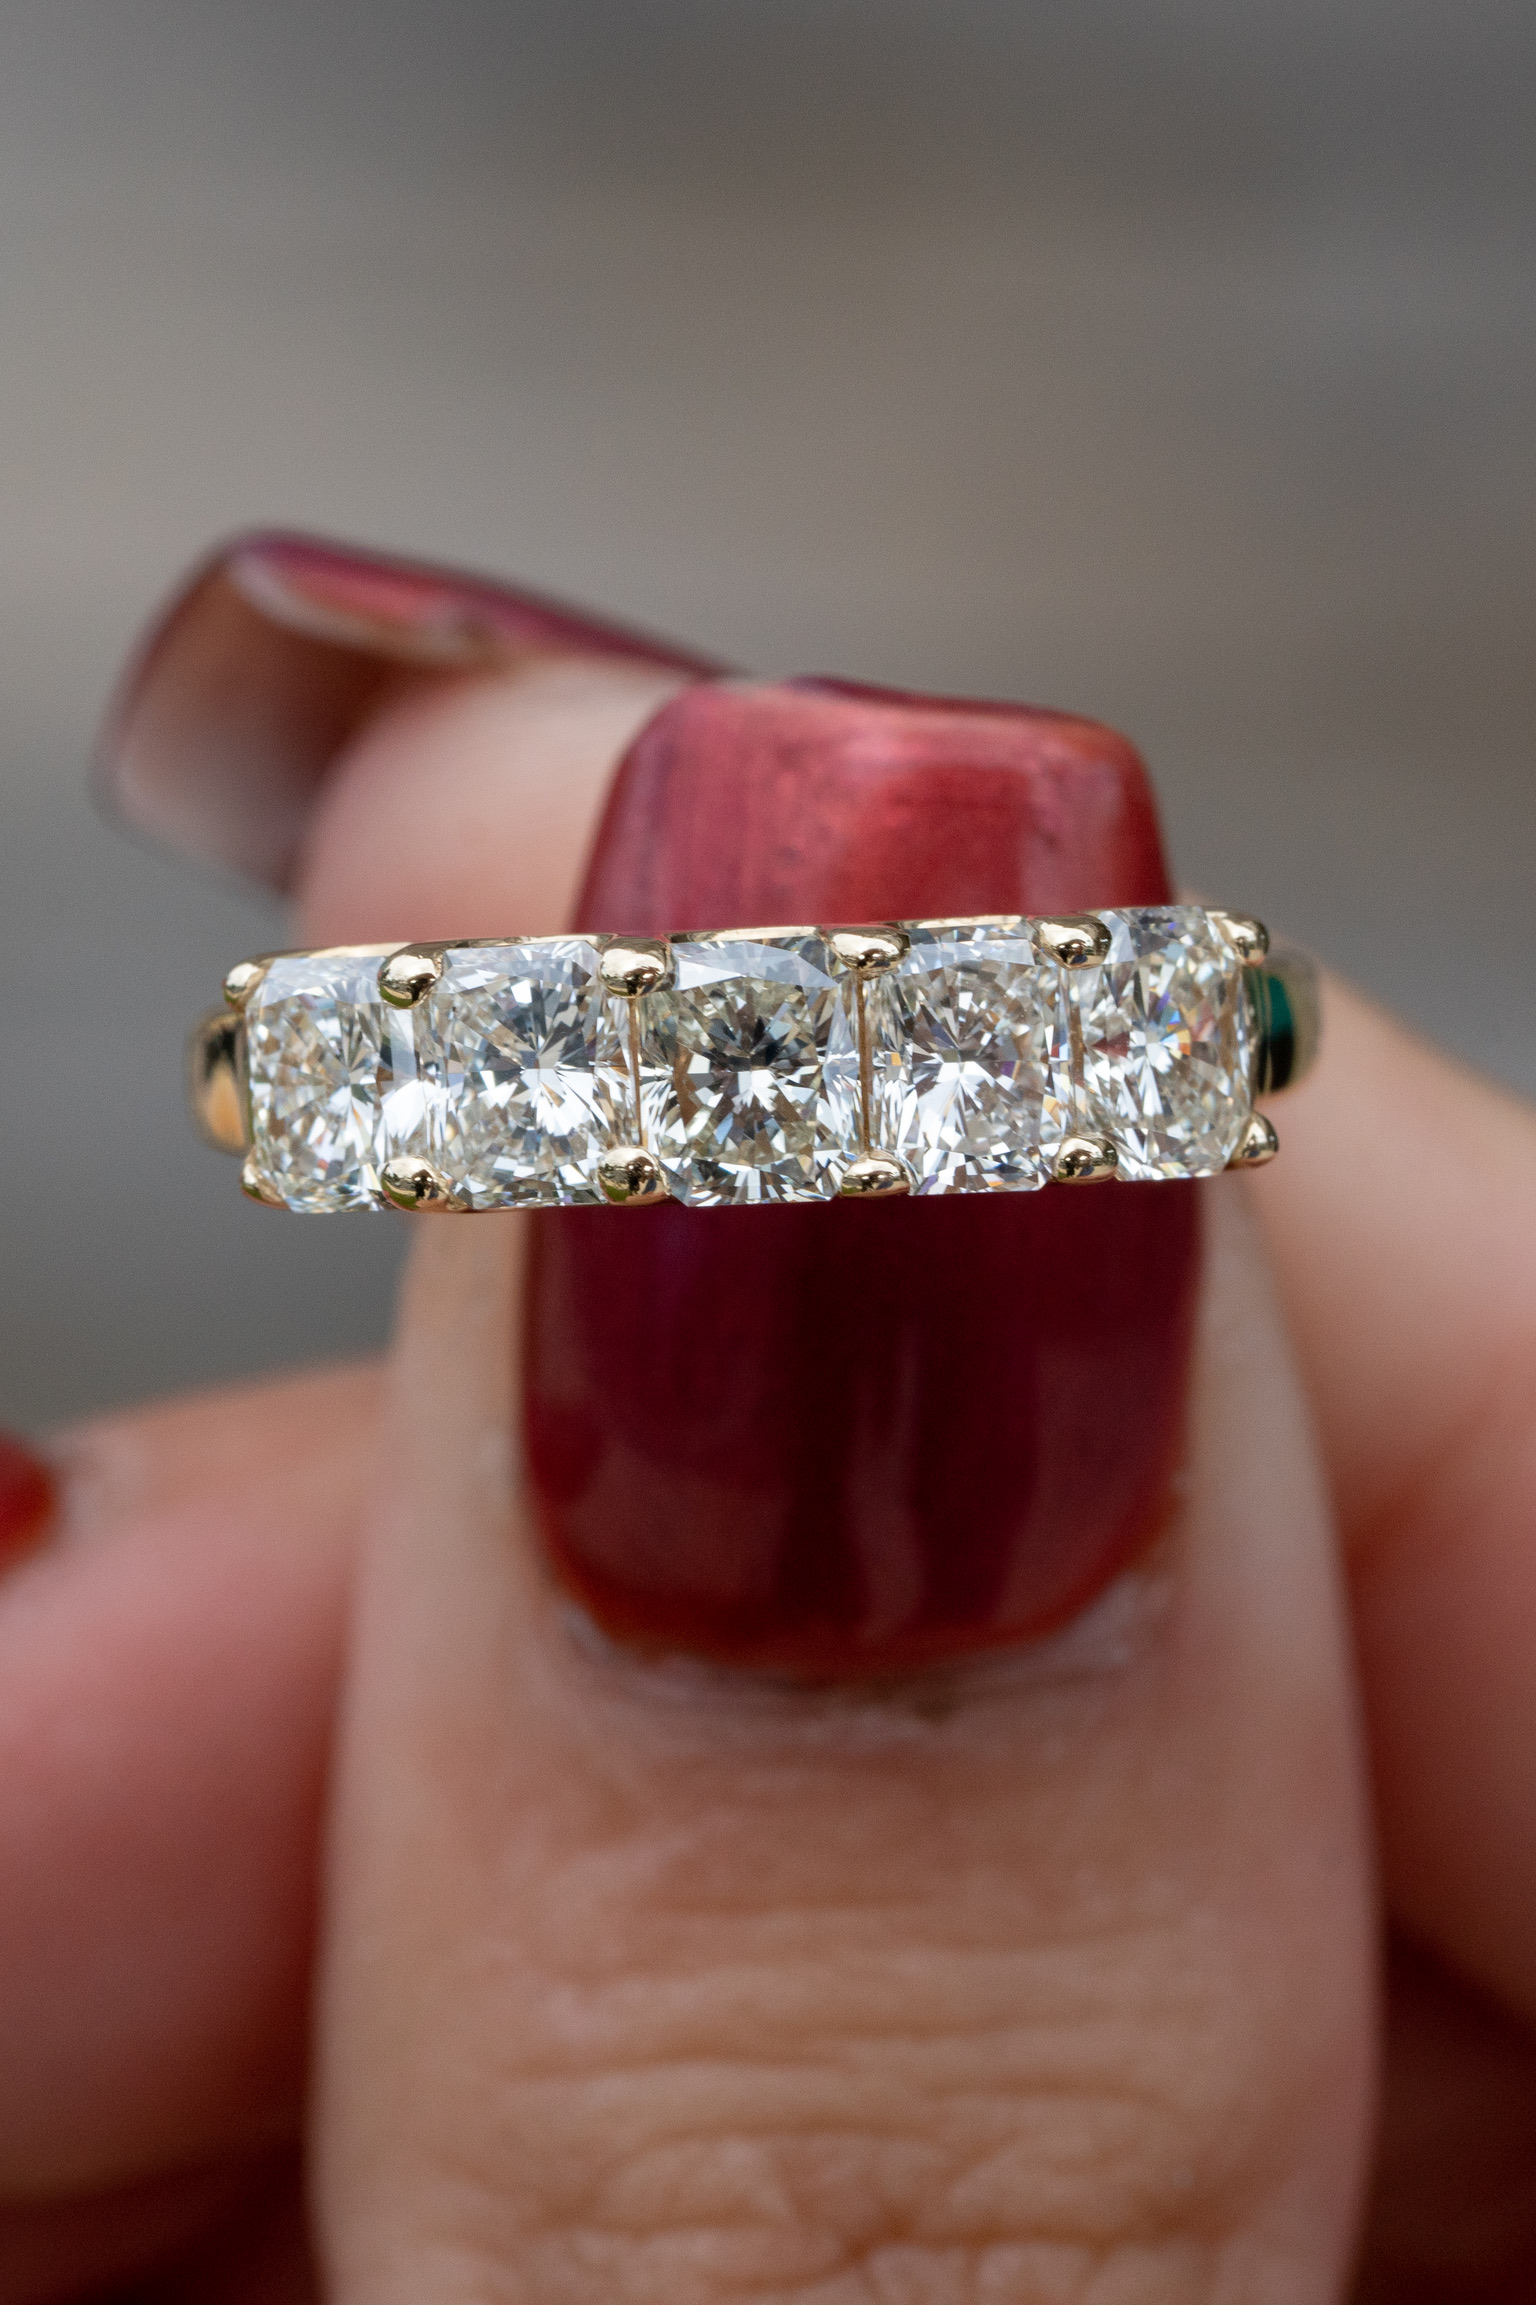 All About Clear & Colorless Stones: 5 Stone Options For Your Engagement Ring